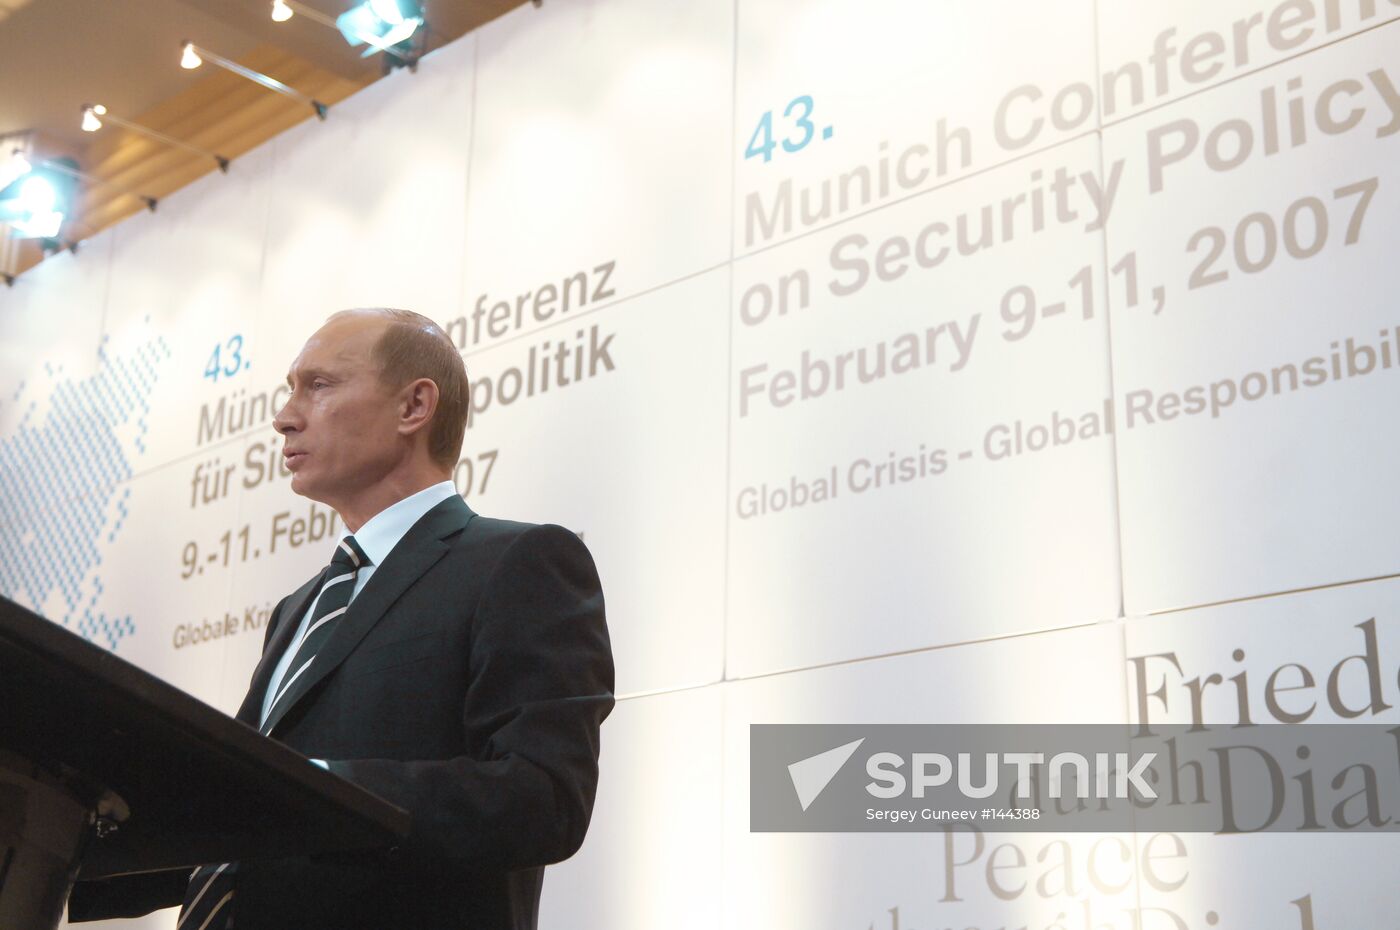 MUNICH CONFERENCE ON SECURITY POLICY